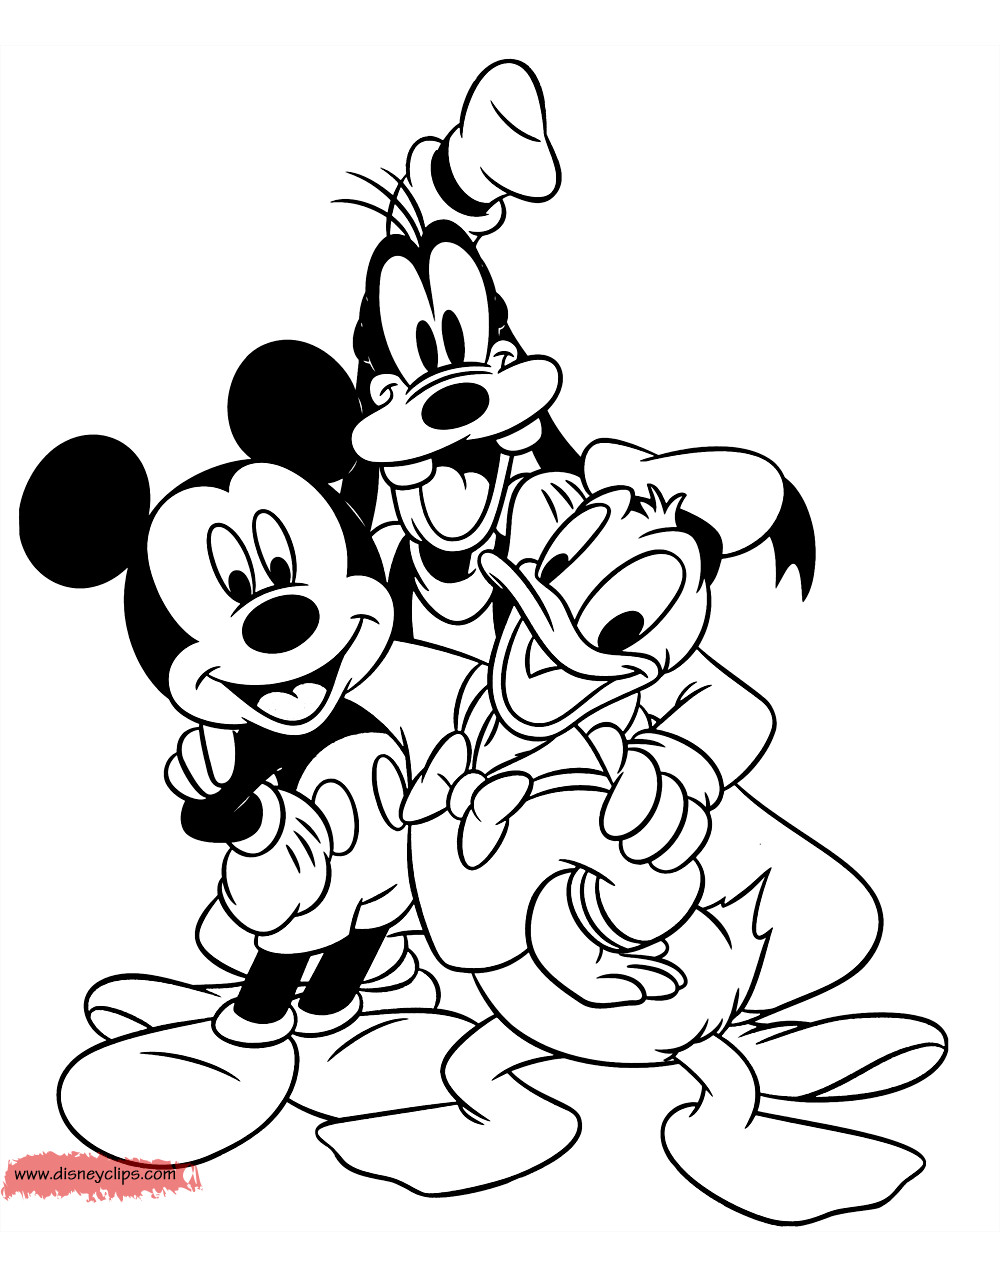 Mickey Printable Coloring Pages
 Mickey Mouse & Friends Coloring Pages 2